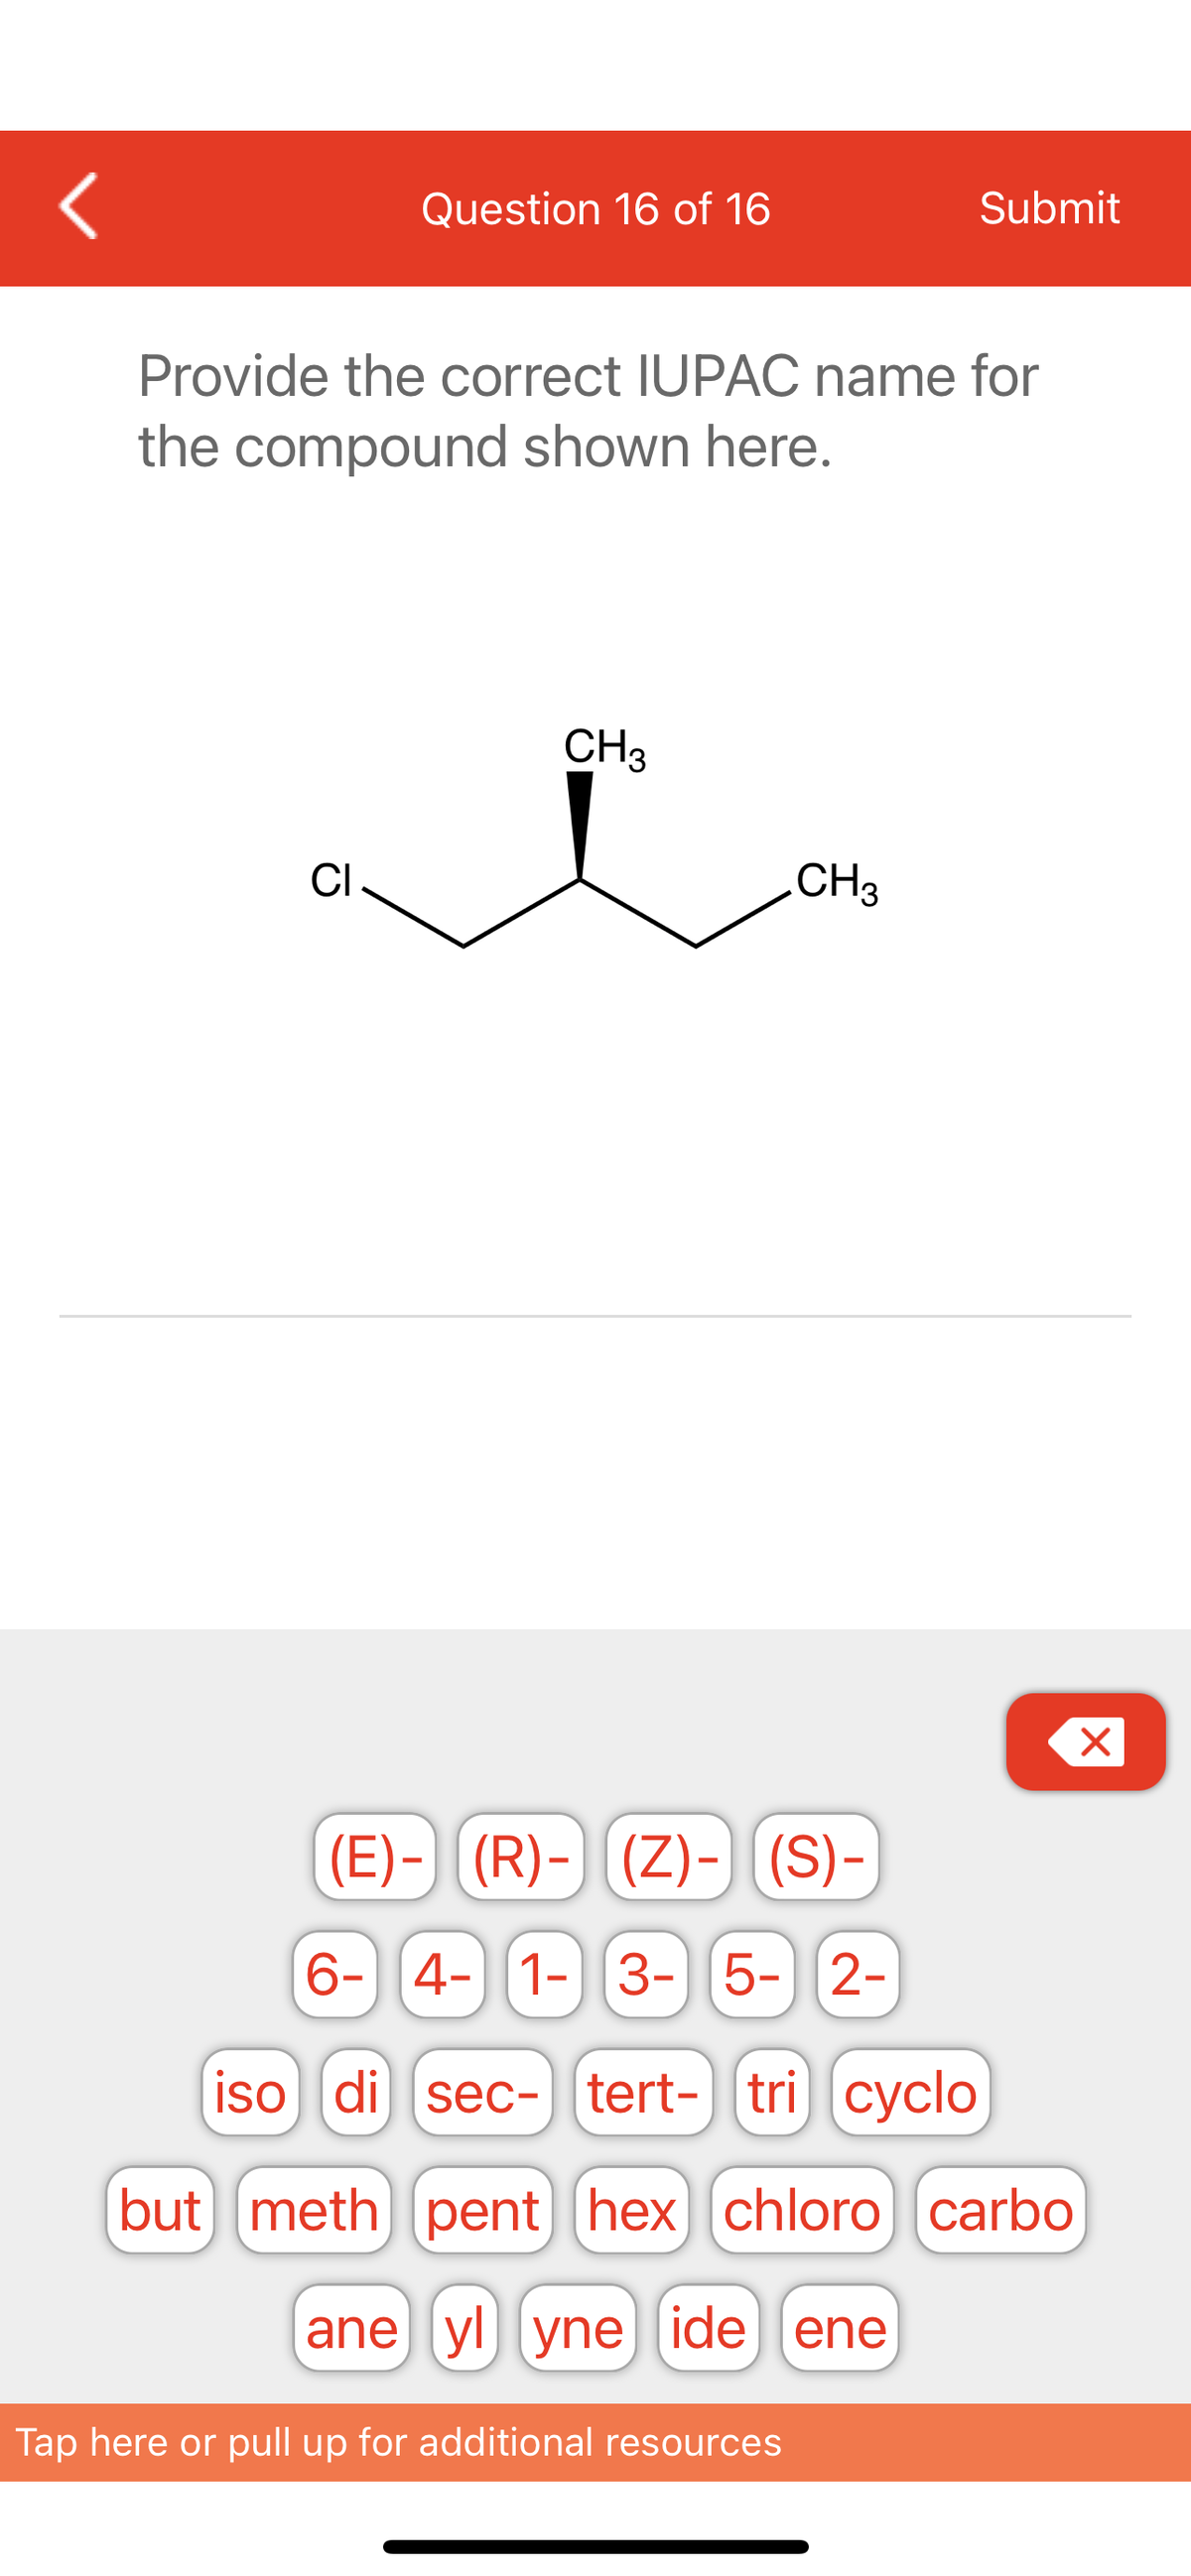 <
CI
Question 16 of 16
Provide the correct IUPAC name for
the compound shown here.
CH3
but meth)
(E)- (R)- (Z)-) [(S)-
6- 4- 1- 3- 5- 2-
CH3
iso di sec- tert- tricyclo
Submit
pent] [hex] chloro carbo
ane yl yne ide ene
Tap here or pull up for additional resources
X